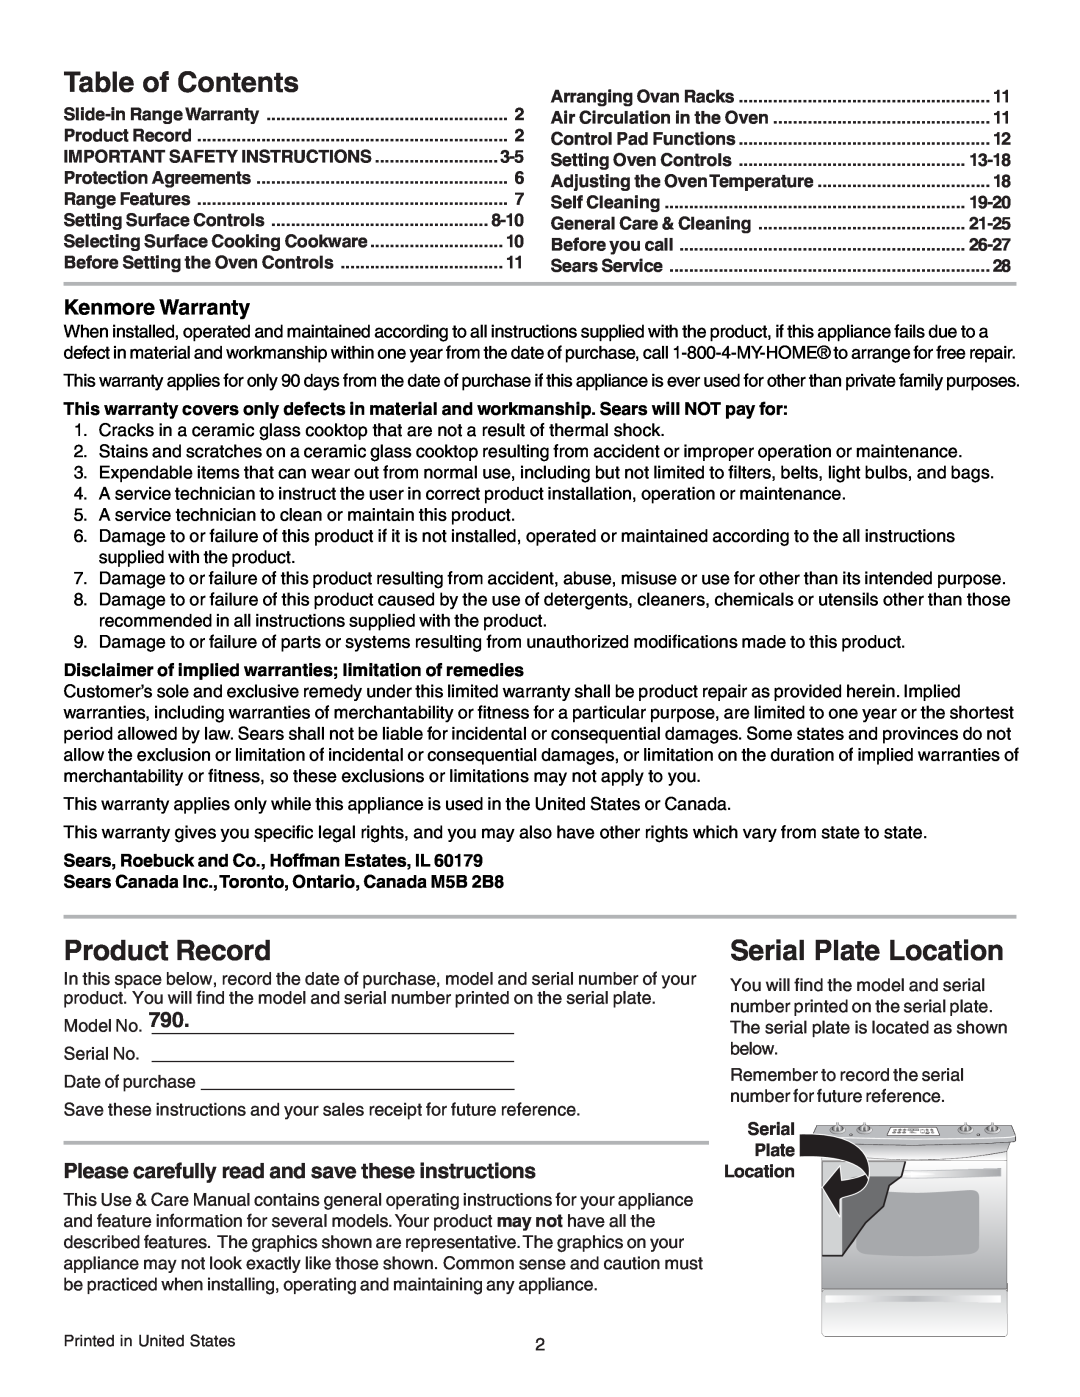 Kenmore 790.4659 Table of Contents, Product Record, Serial Plate Location, Kenmore Warranty, 8-10, 13-18, 19-20, 21-25 